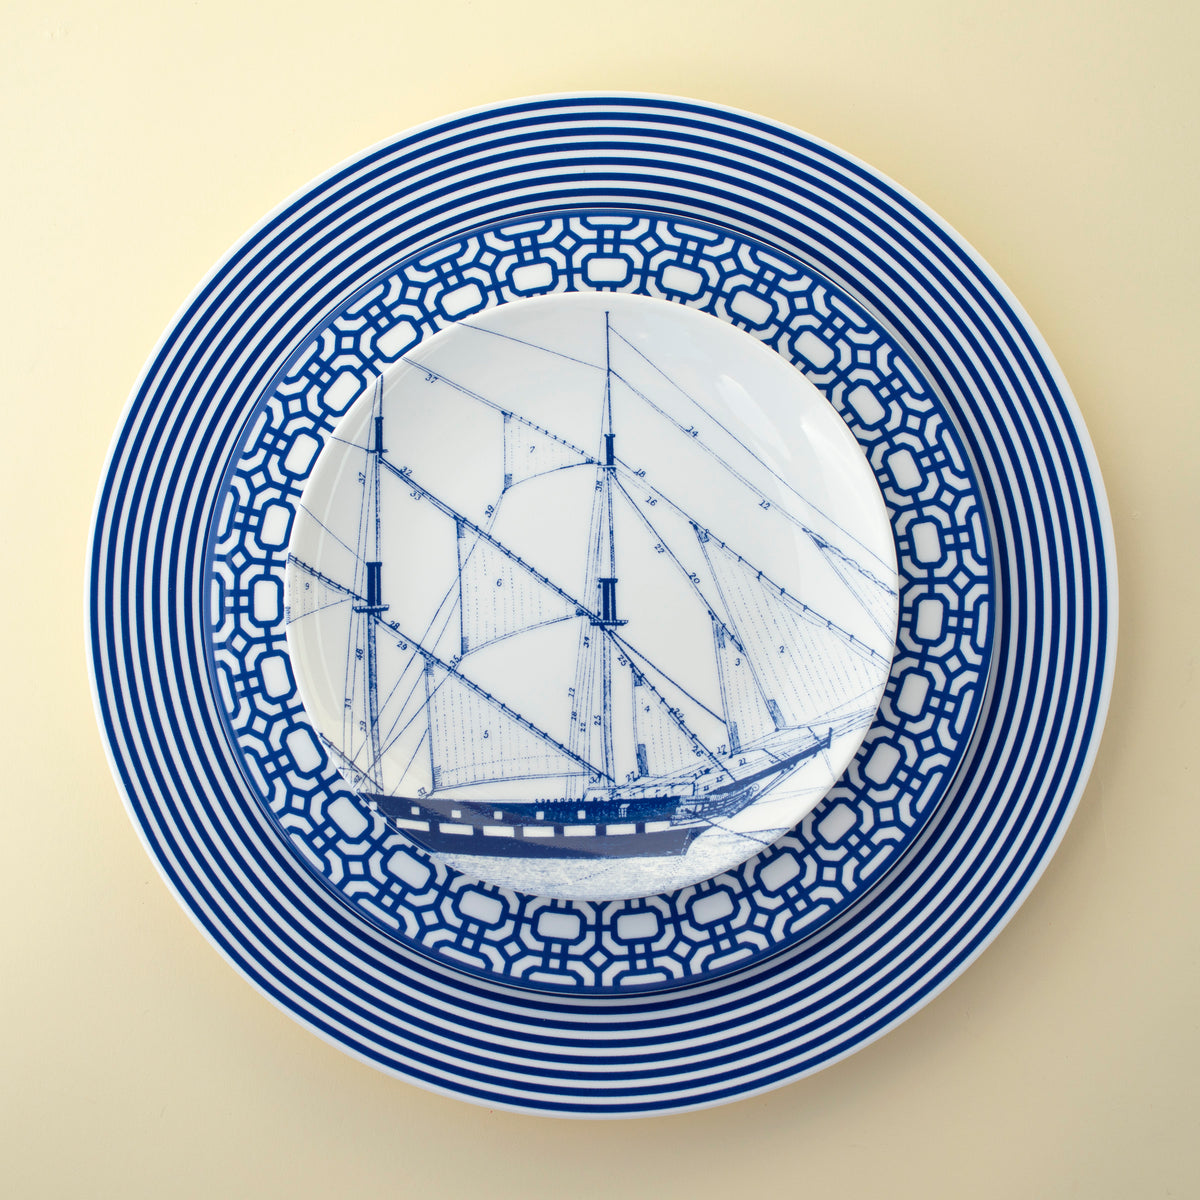 A Caskata Artisanal Home Rigging Small Plate with a blue and white pattern featuring a ship illustration in the center is pictured against a plain background, embodying vintage illustrations that celebrate nautical heritage.